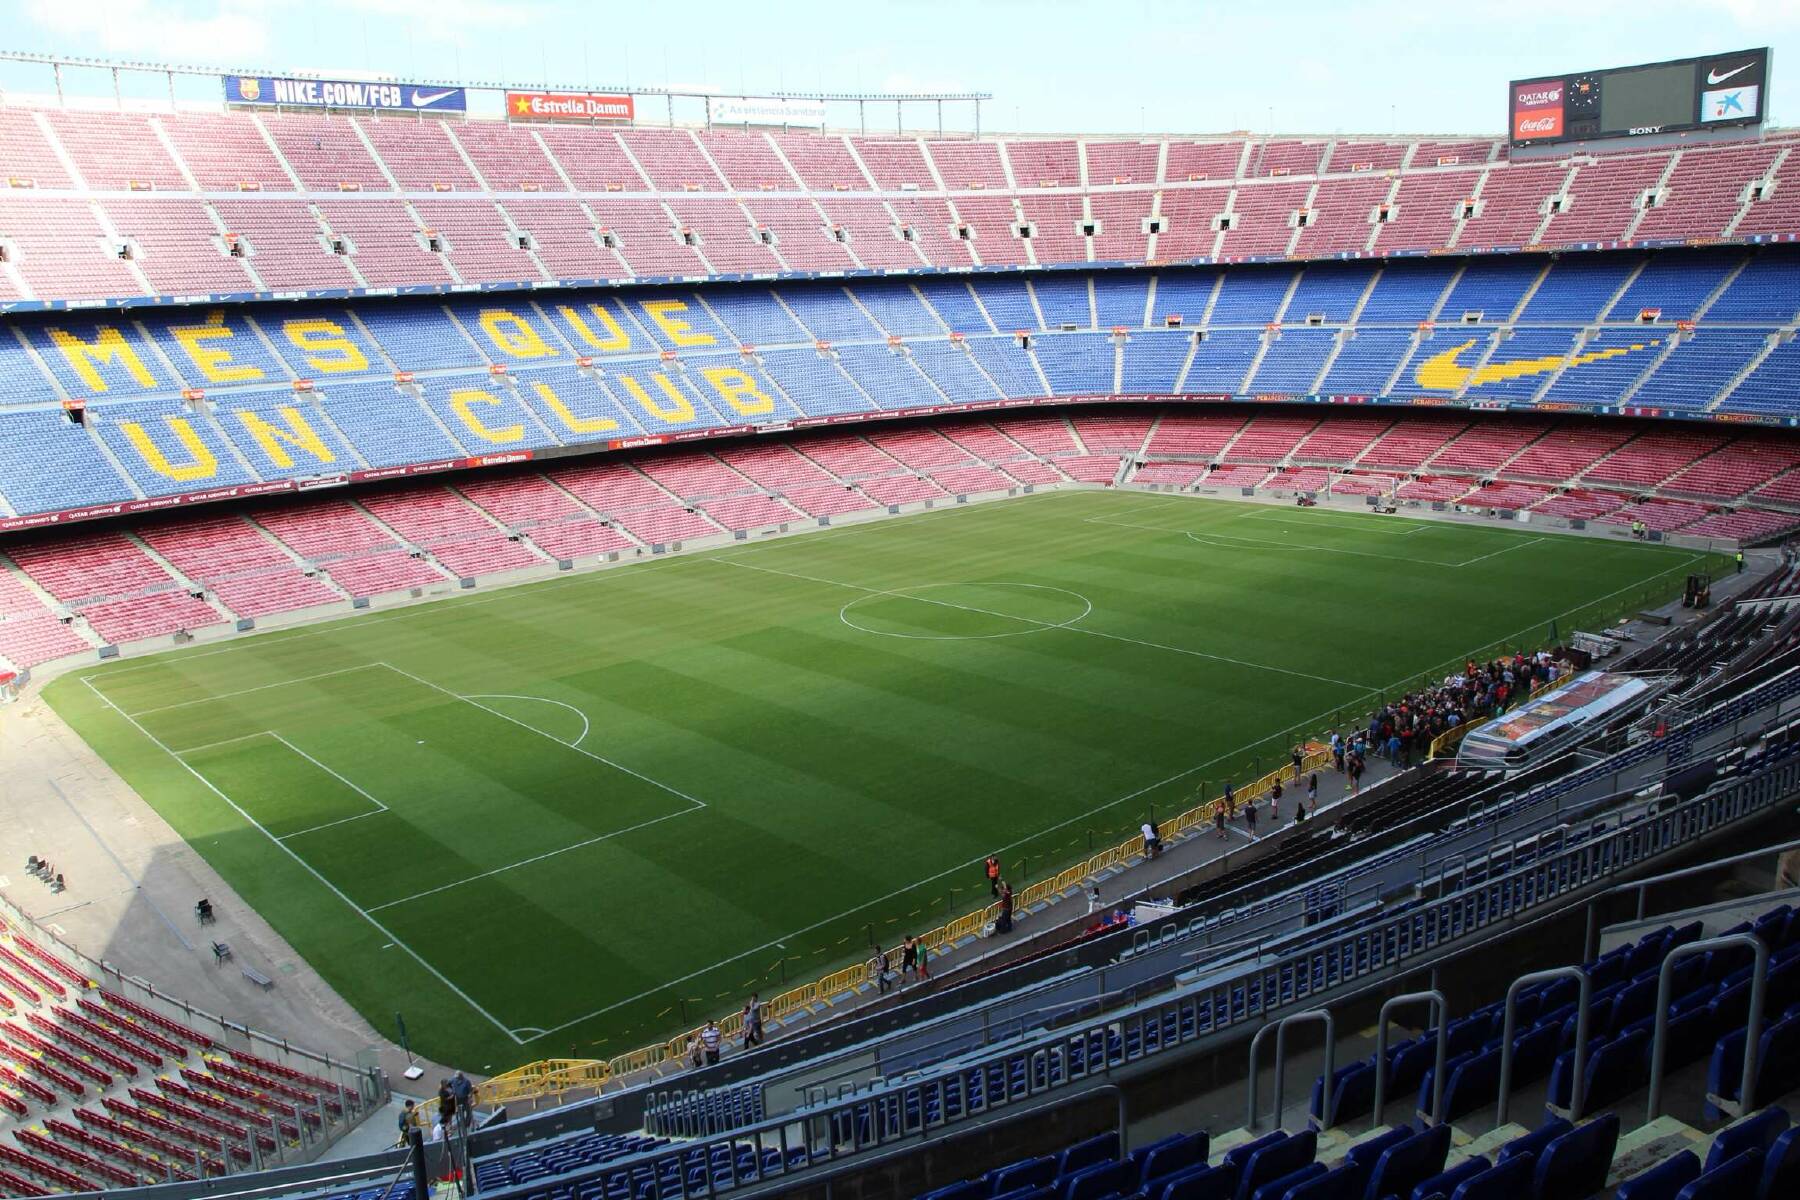 Book your tickets for home games of the FC Barcelona